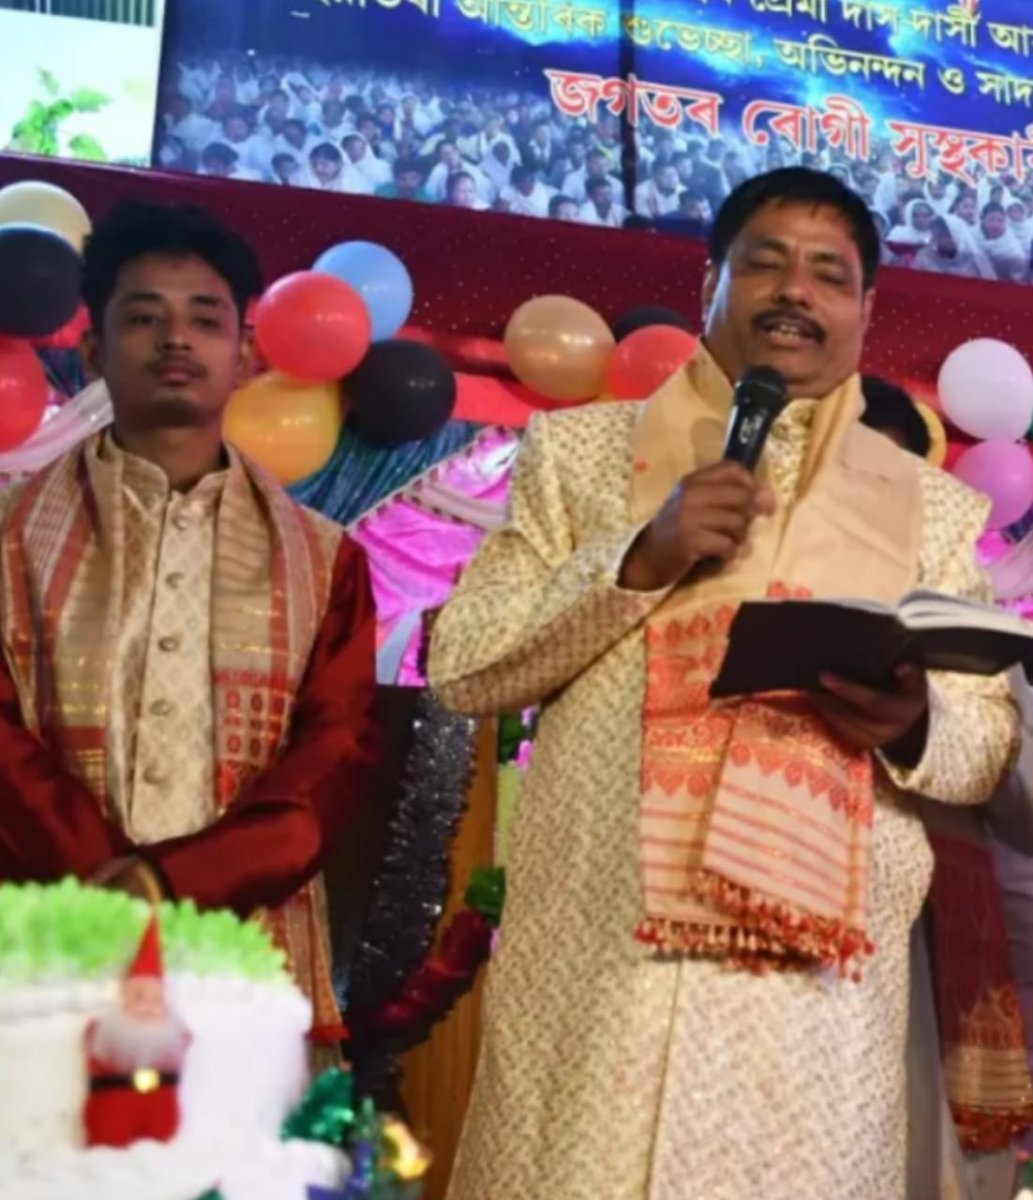 Assam: Christian Evangelist 'Ranjan Chutia' Arrested for Converting People in the Name of Treatment by adding Jesus Christs Name in Traditional Assamese Devotional Songs